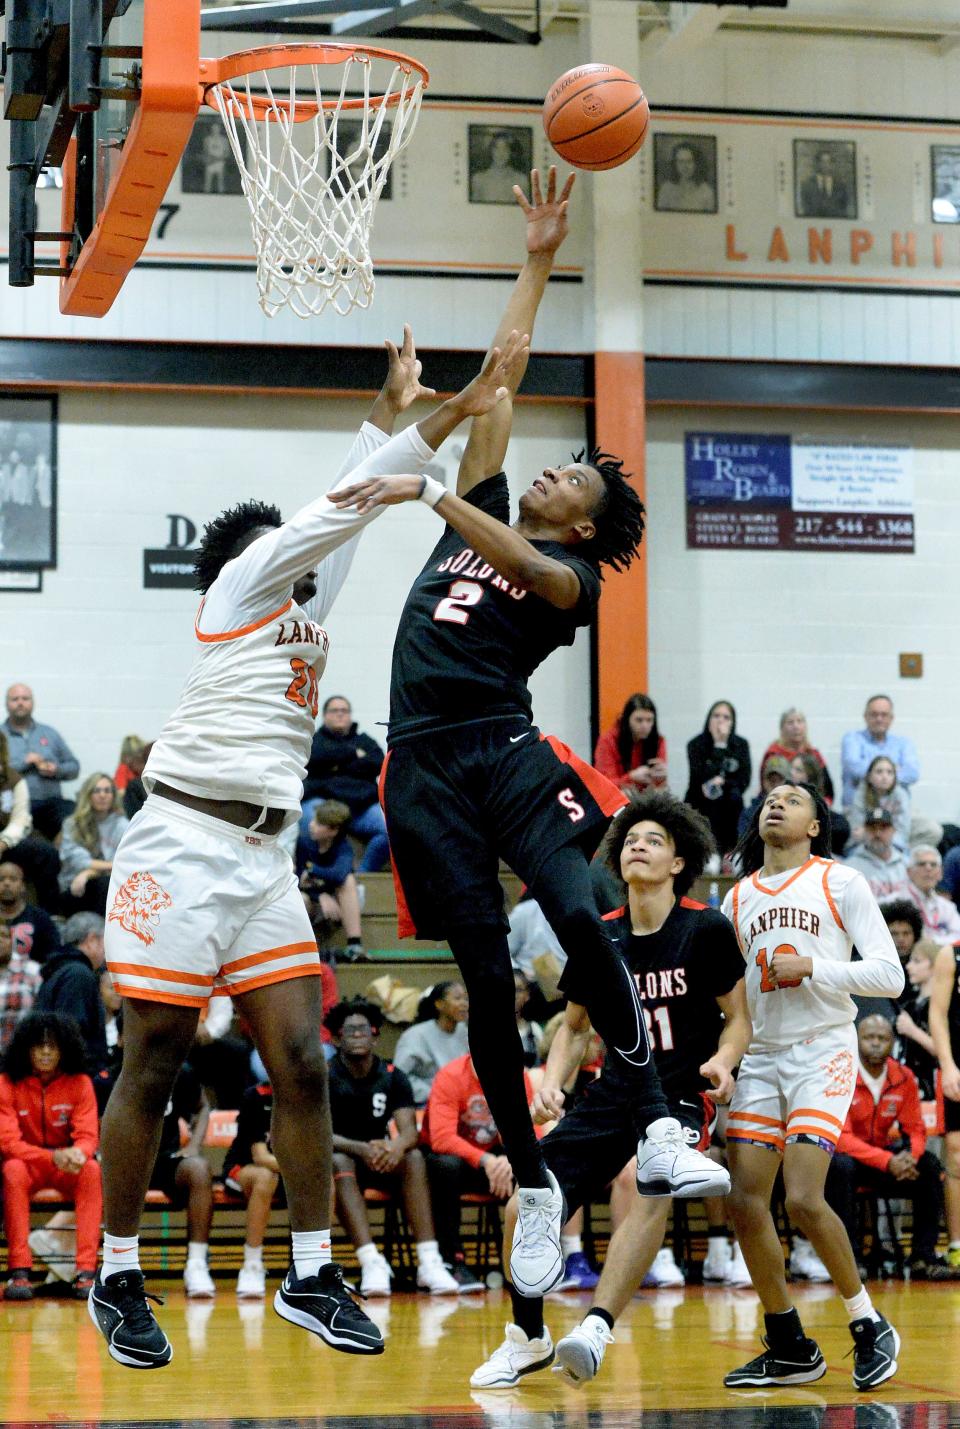 Springfield's Kevin Crews, Jr. goes up for a shot during the game against Lanphier Friday, Dec. 8, 2023.